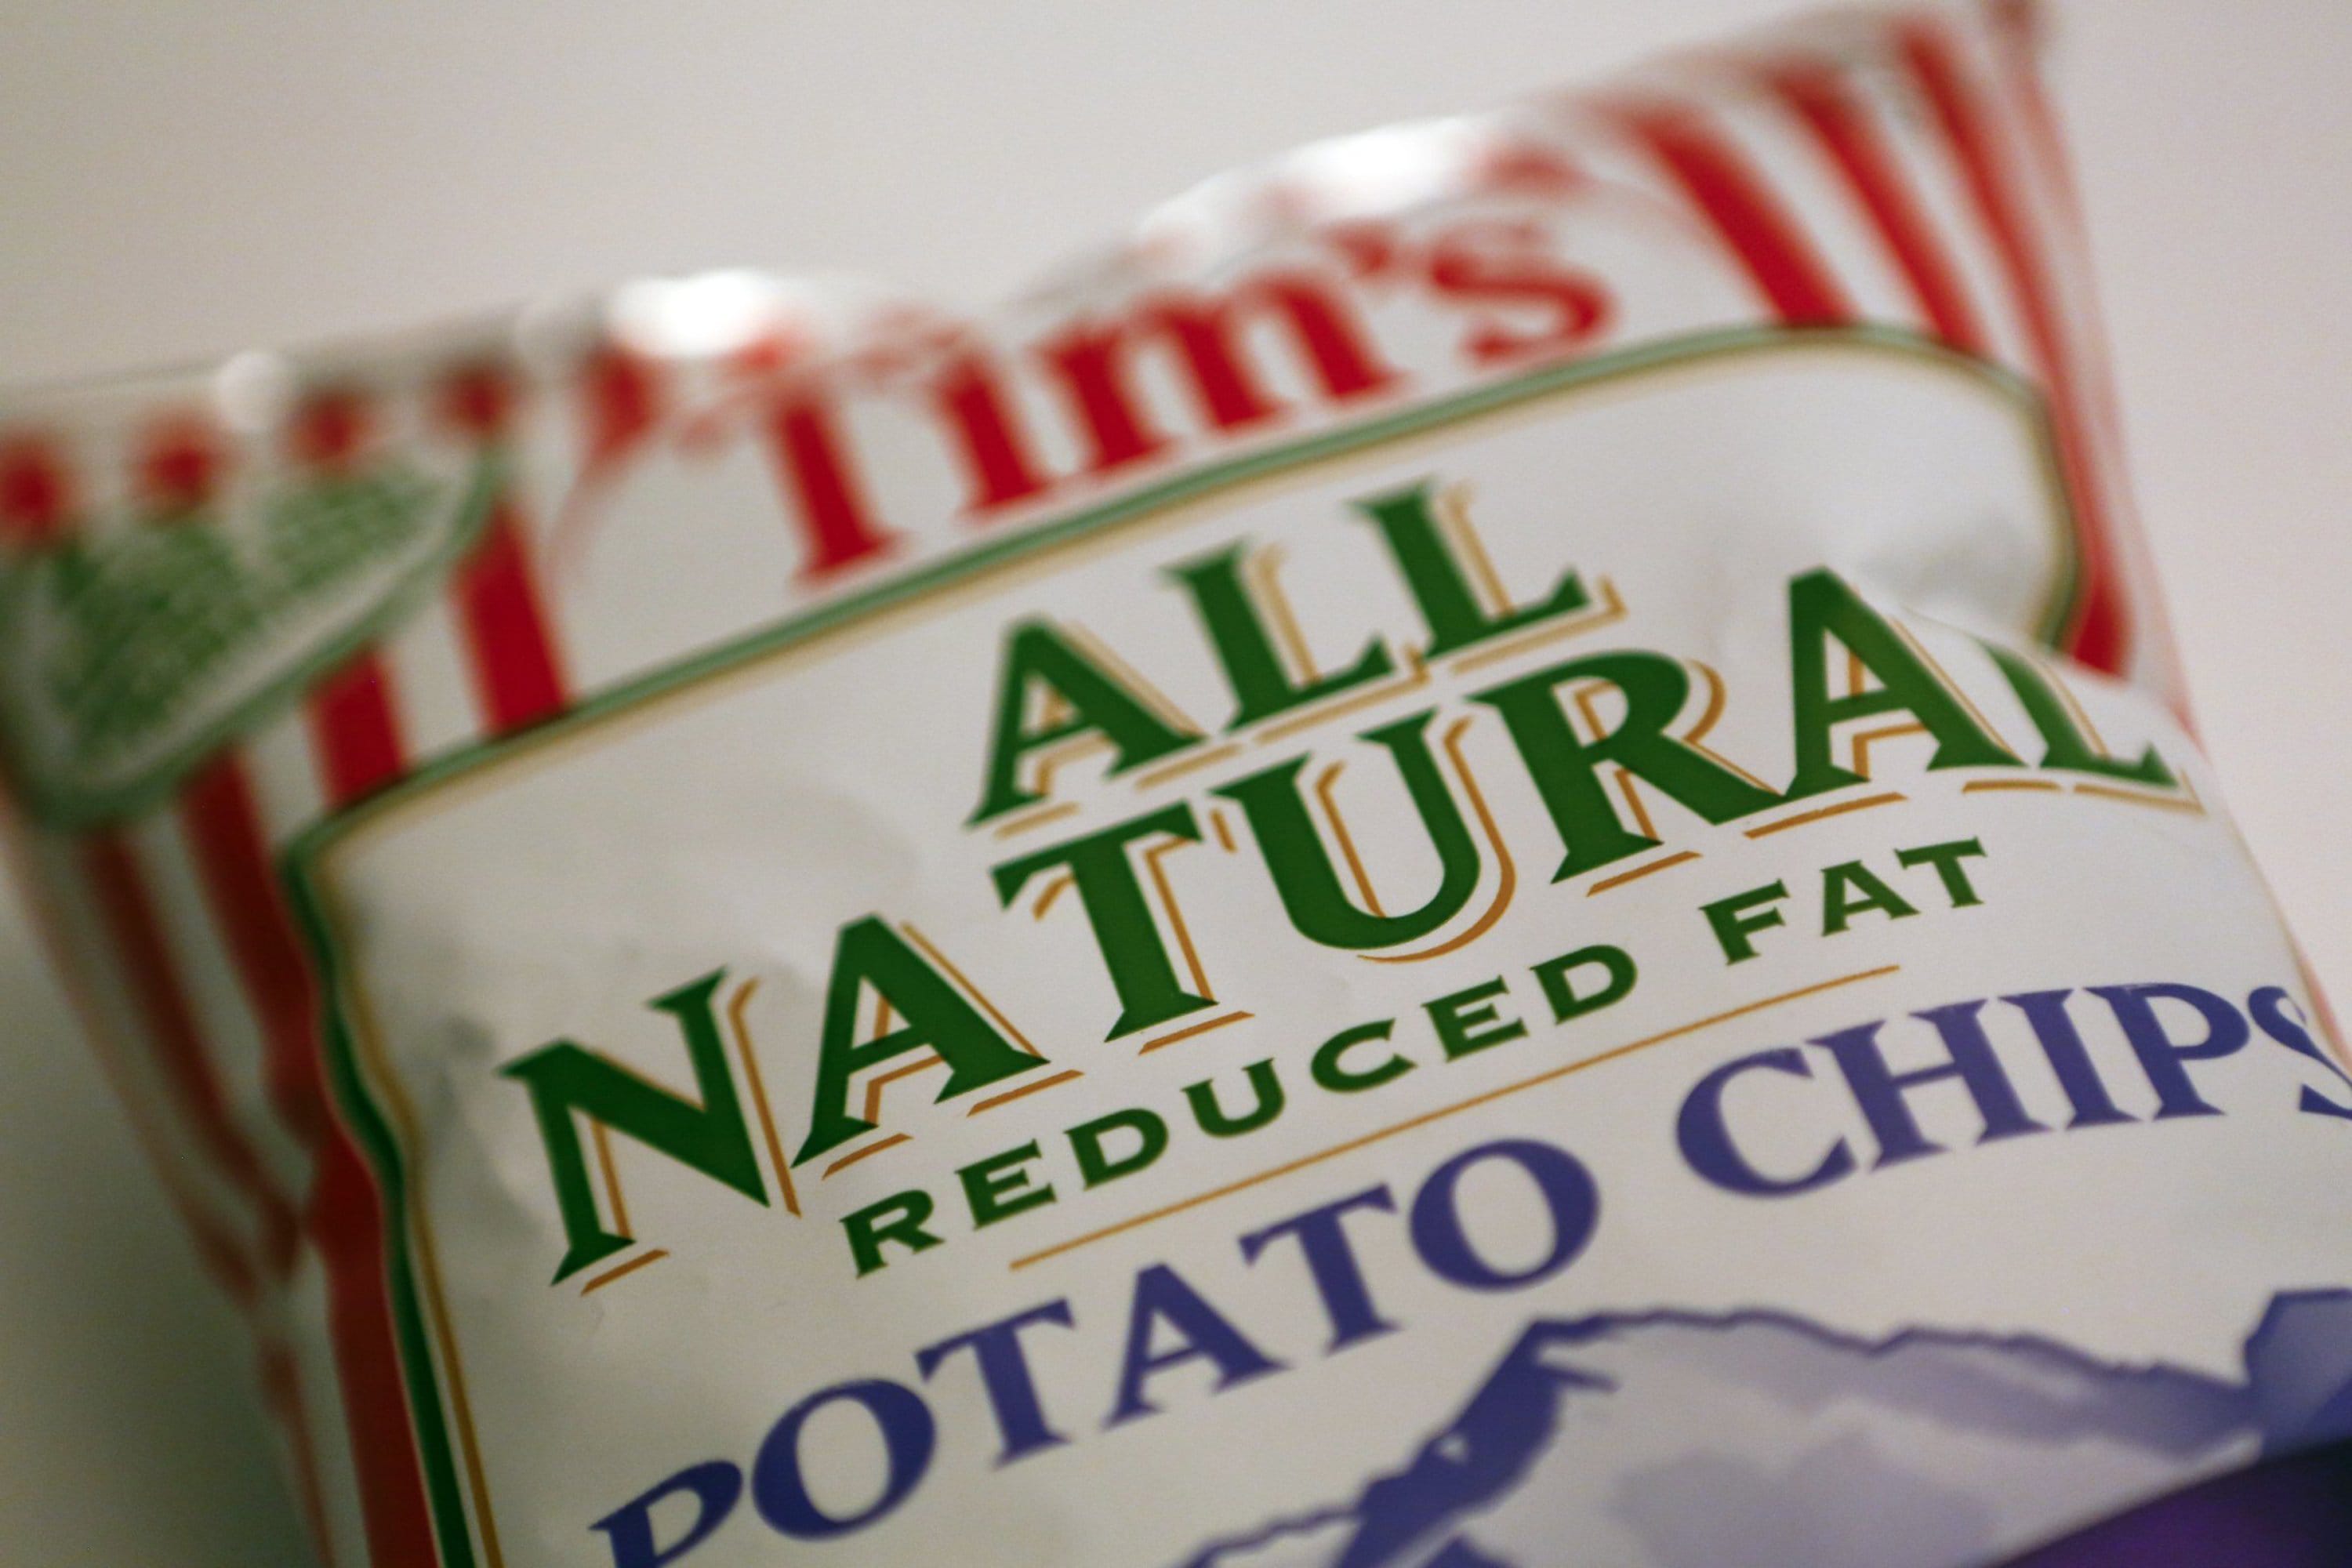 Consumers are drawn to products with labels using the word &quot;natural,&quot; such as these Tim's All Natural Potato Chips.